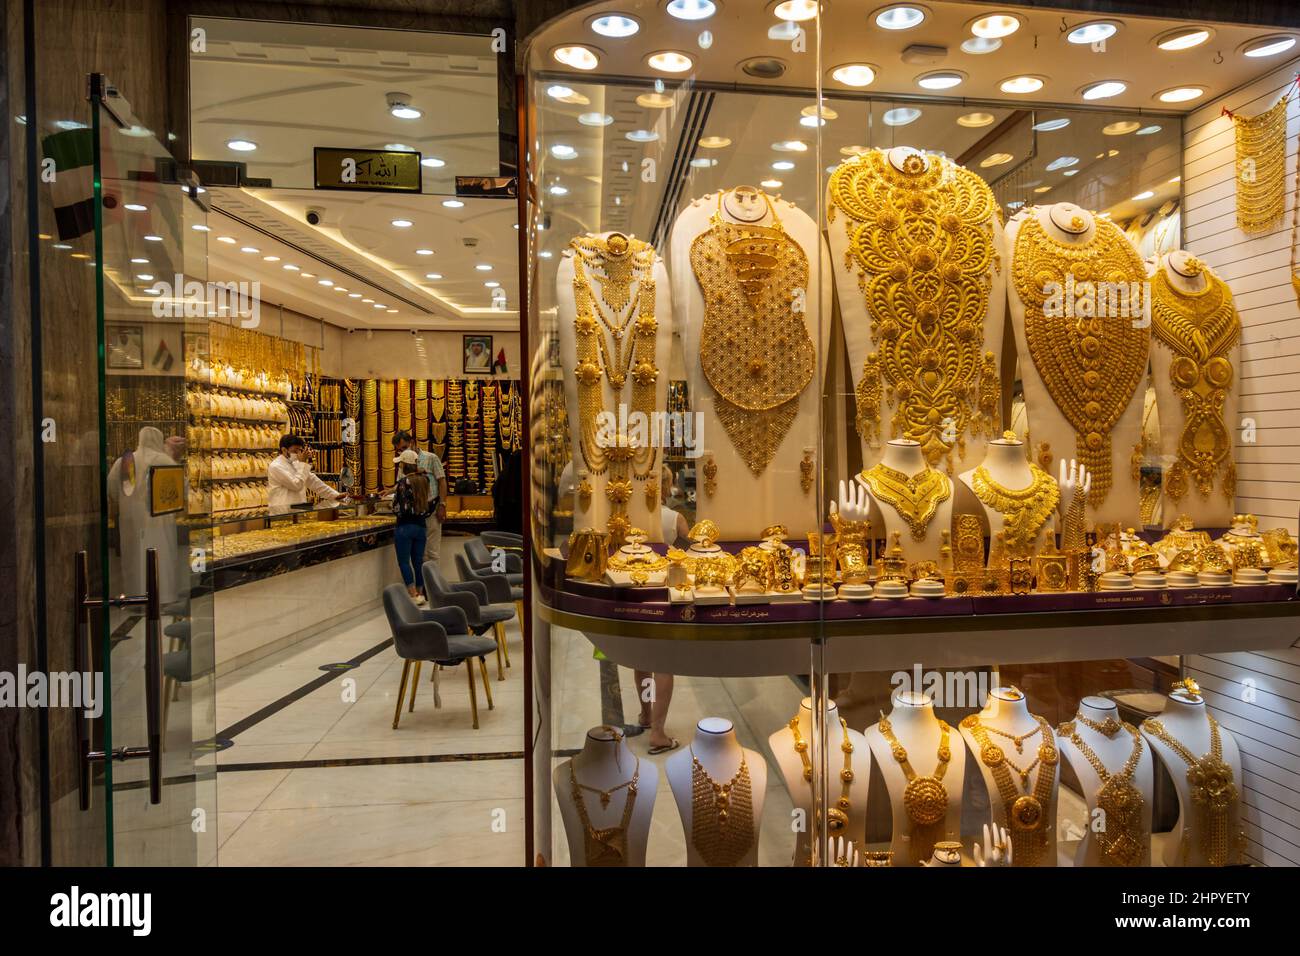 Shop window inside the Dubai Gold Souk in the Deira district. One of the most popular shopping destinations and gold markets in the Dubai. Stock Photo